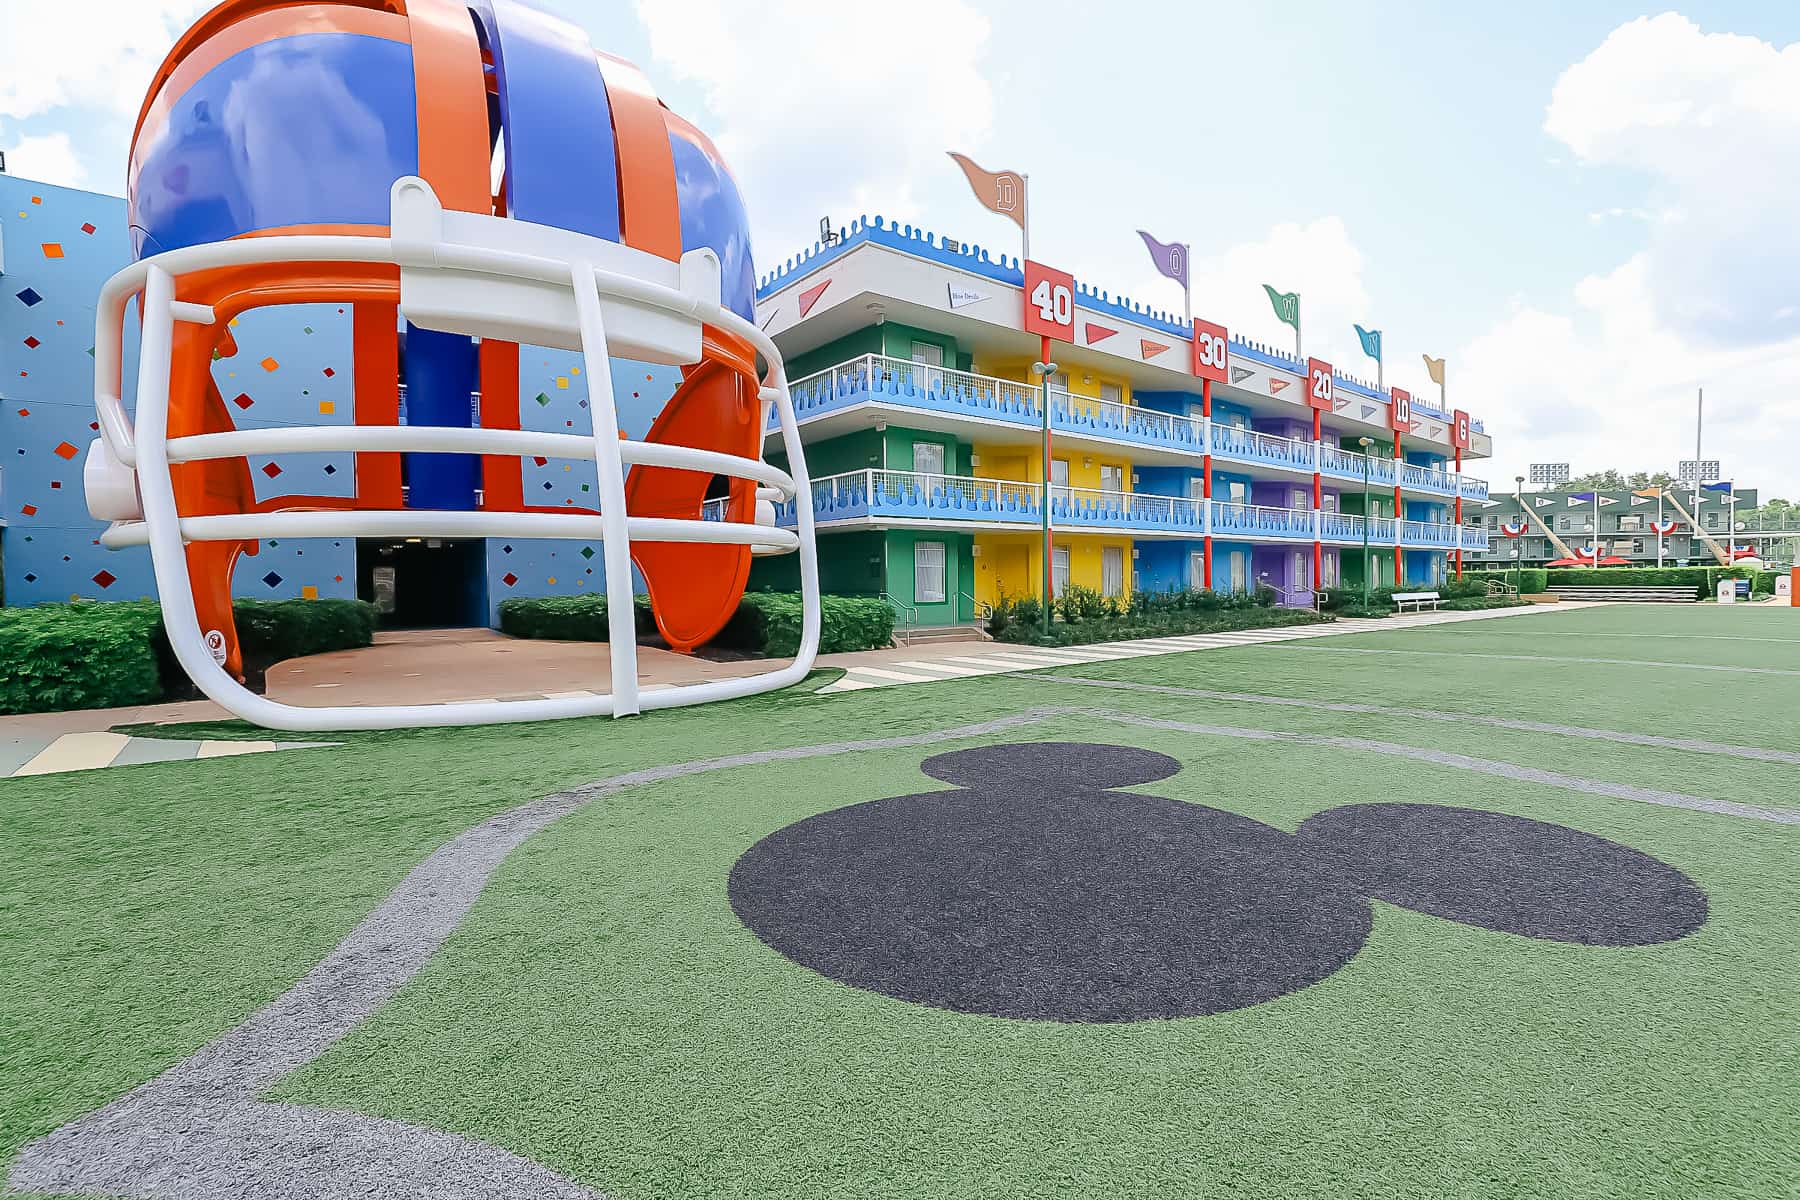 The football field with a giant helmet at Disney's All-Star Sports.